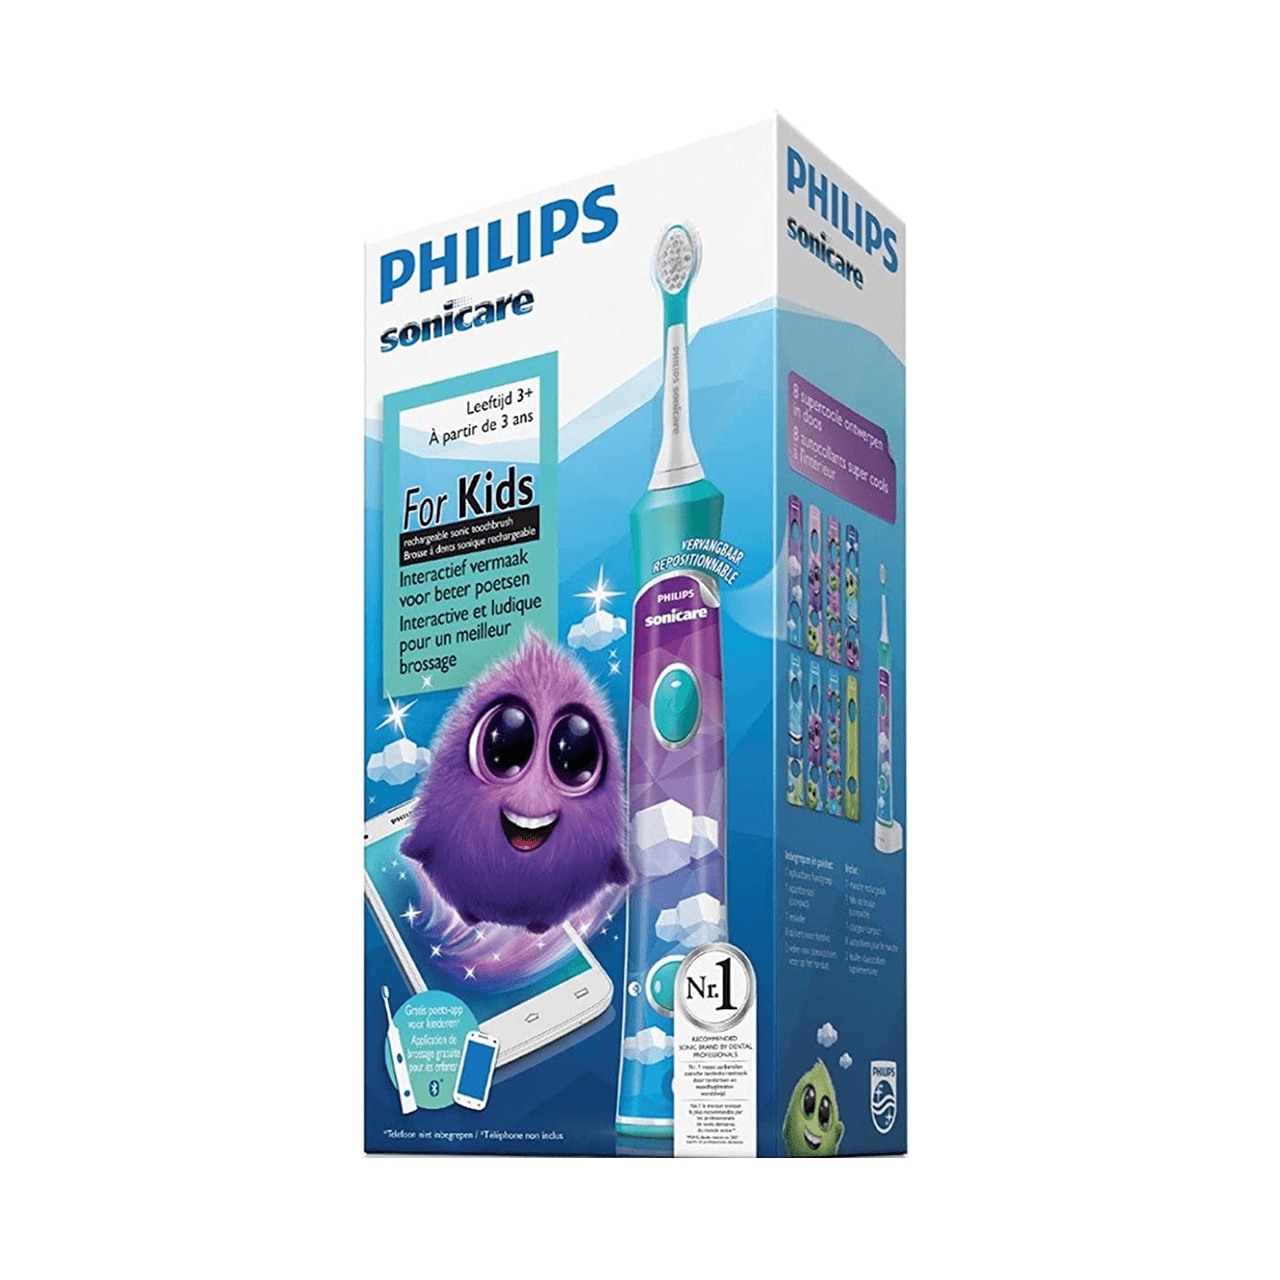 herberg Activeren Zuiver Philips Sonicare Electric Toothbrush For Kids